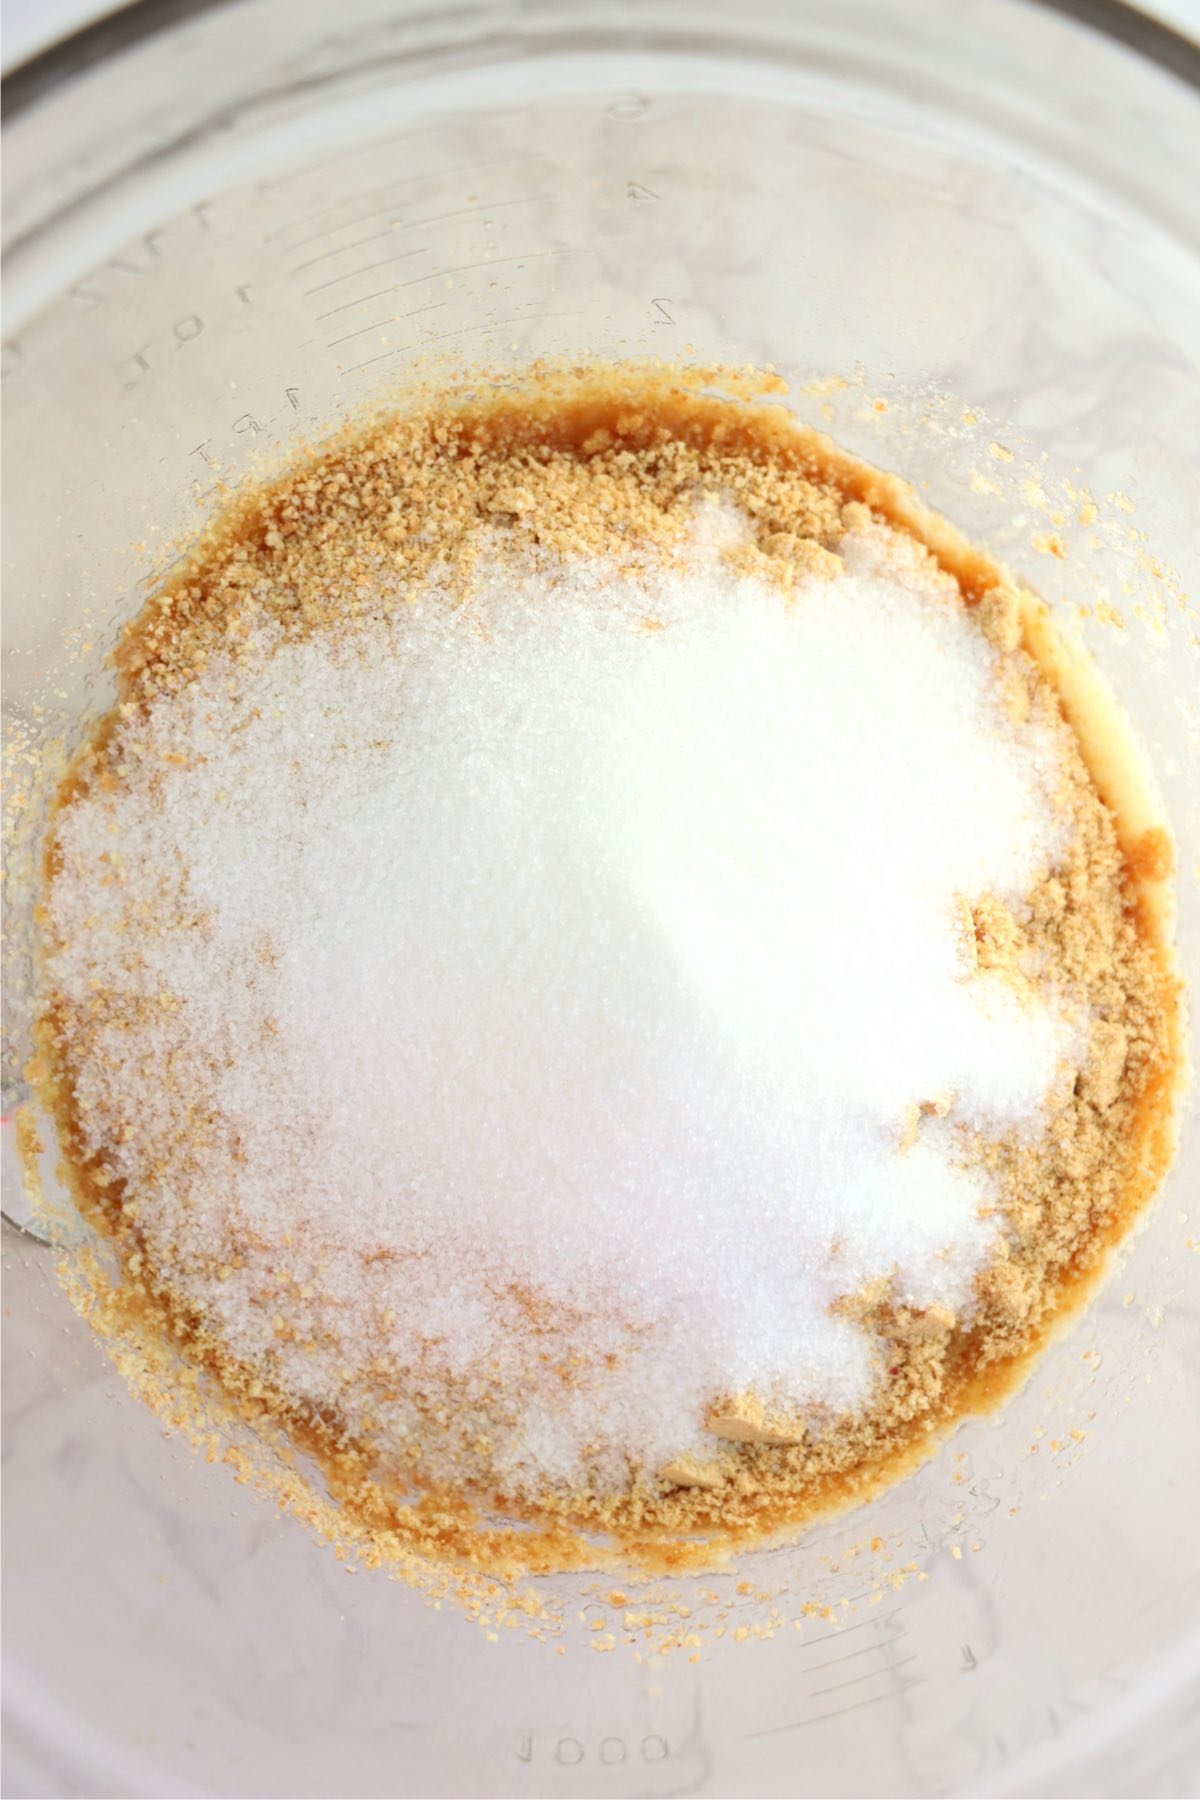 Graham cracker crumbs, sugar and melted butter in a glass mixing bowl